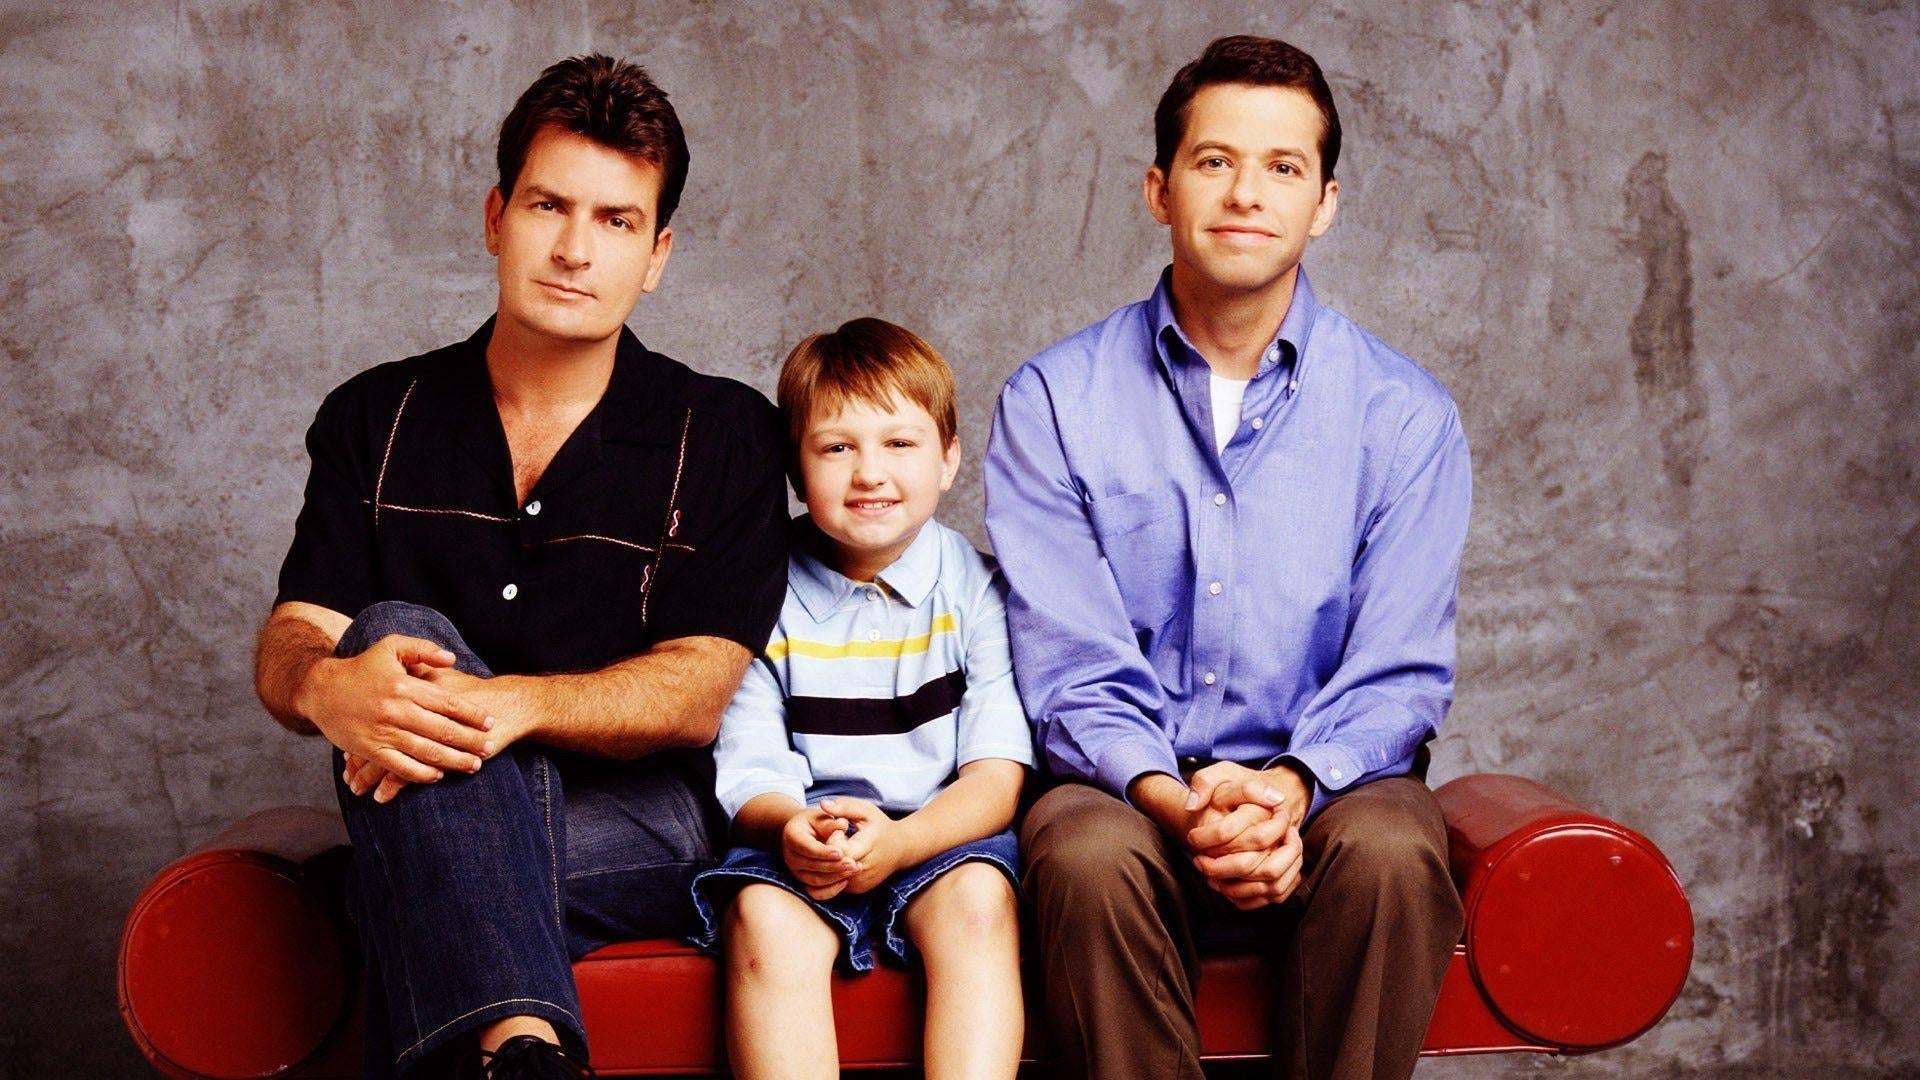 Two and a Half Men: The Complete Series - Seasons 1-12